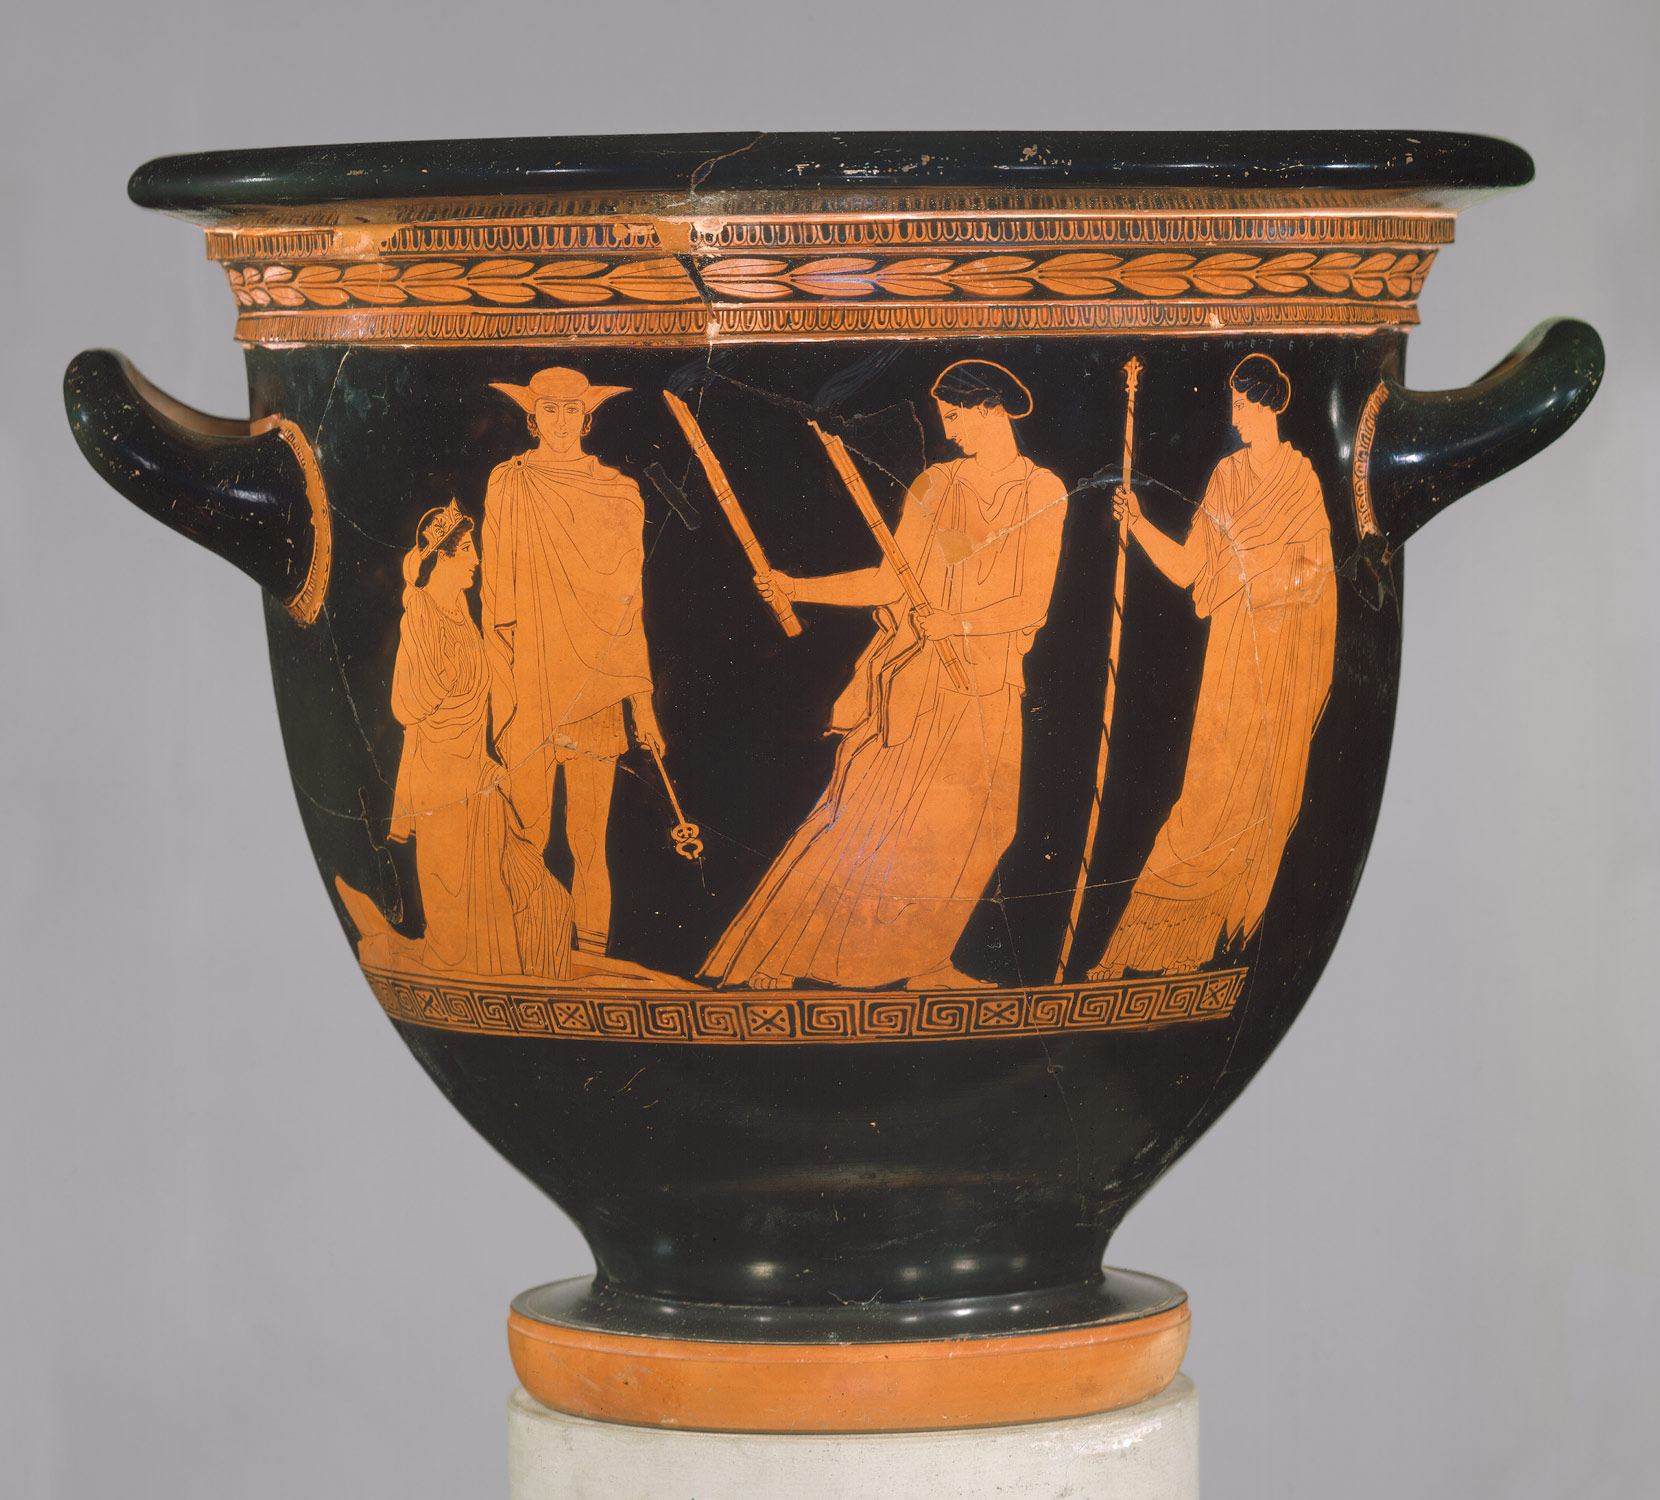 Hekate, with torches, leading Persephone from the Underworld. From a terracotta krater, attributed to the Persephone Painter, c.440 BC 